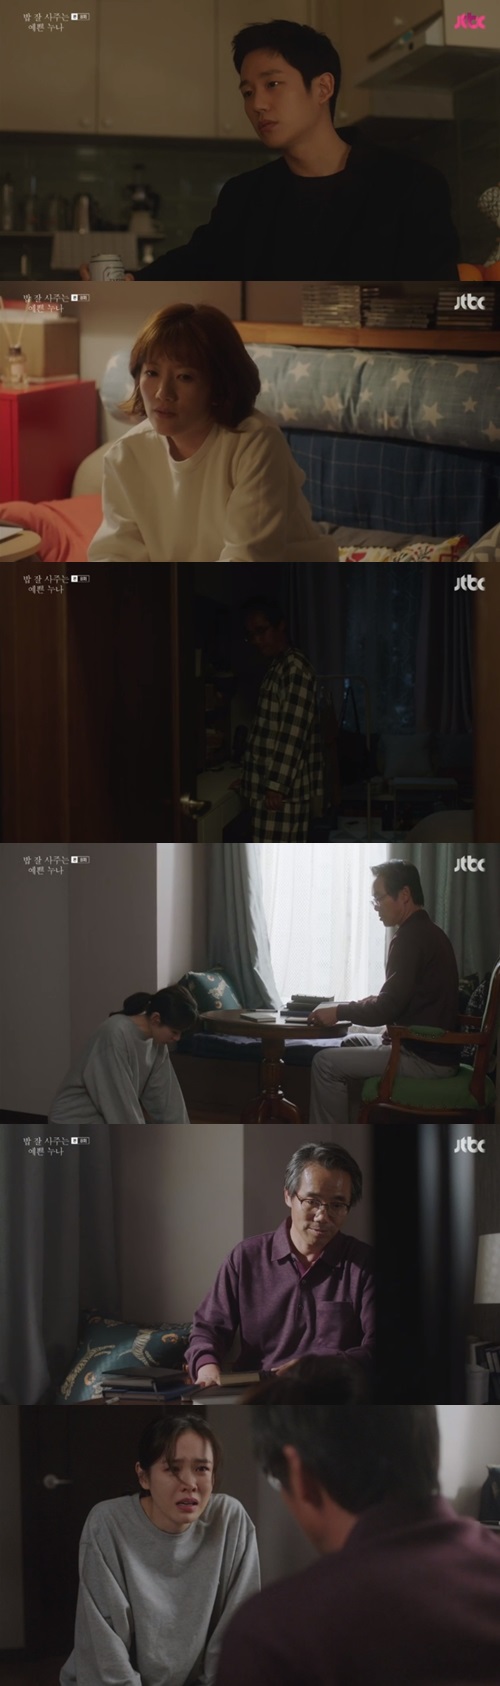 Son Ye-jin Jung Hae-In The true difficulty of love became clear.JTBC Gumdo Drama broadcasted on April 21 (Screenwriter Kim / Director Anne Pang Suk), Seo Jun-hee (Jung Hae-In) Complex private life of his father Was revealed.Yunjin (Son Ye-jin minutes) fell in love with Seo Jun-hee, a friend of my brother Young-soo (upper Jae-jun), my friend Sogyeong-soon (Jang Soo Young minutes), informing the fact of romance very much The leading edge of Yunjin, the Igekin (Olun Min), made a problem altogether.Ikkyin abducted Yunjin that he would meet the problem of changing the name of the mobile phone, and brought one uproar again.Abduction followed Chasago, Seo Jun-hee was over Yunjin who was brought to the hospital.Seo Jun-hee also made a chest up of Ikimin.However, that evening night Yunjin and Seo Jun - hee had a sweet time with an excuse for the accident.In the house of Yunjin, the Yunjin father Yunsangi (Oh ​​Man-seok part) who did not know about the accident of her daughter was distracted for seeing Ikyin first.Prior to the kidnapping of Yunjin, before I kidnapped Yunjin, I met Yunsangi and said Yoon Jin baby s younger brother s friend Seo Jun - hee and romance, I am not fickle.We apologize. Yoon Sang-gi said, Since I was a child, I thought like my son, and I know how solid a youth is.Though it seems that Jina could not talk about thinking that she was surprised, thank you for saying instead , sank with depriving Ijkimin.Yunsangi asked about his father Kim Mi-young (Gil Hyeon minutes) implicitly about his father, Kim Mi-yon said, A child born to the third woman has entered the elementary school film.The woman who met secondly also has a hard time.What lives two people, is a child born and gives birth to children?Because I have a primary election, I am not going to be a bride instead of romance. Yunsangi will respond Junghi is Bonayazi Kim · Miyong said, Who are the poet poems who belong to this family tree?Think of it as Jina.Do you want to send to such a house?No virgin ghost creation .Then Seo Jun-hee said, Does not my sister get love, lets love, Sogyeong-soon answered trauma unbelievable, world heritage inheritable only and expressed trauma .Yunjin Seo Jun-hee The real obstacle of love is that Sogyeongseon Seo Jun-hee brothers sister was a complicated private life of his father living.Especially while Yunjin mother Kim Mi Young is not good at creating virgin demon, he is foretelling Yunjin Seo Jun - hee s way of Aoba, this day the end of the broadcast Yun Sanggi confesses love affair to the front Yunjin First, I asked if Juana does not look like it and was wondering whether it would be two love assistants.(Photo = JTBC Capturing a beautiful older sister who often bought rice)